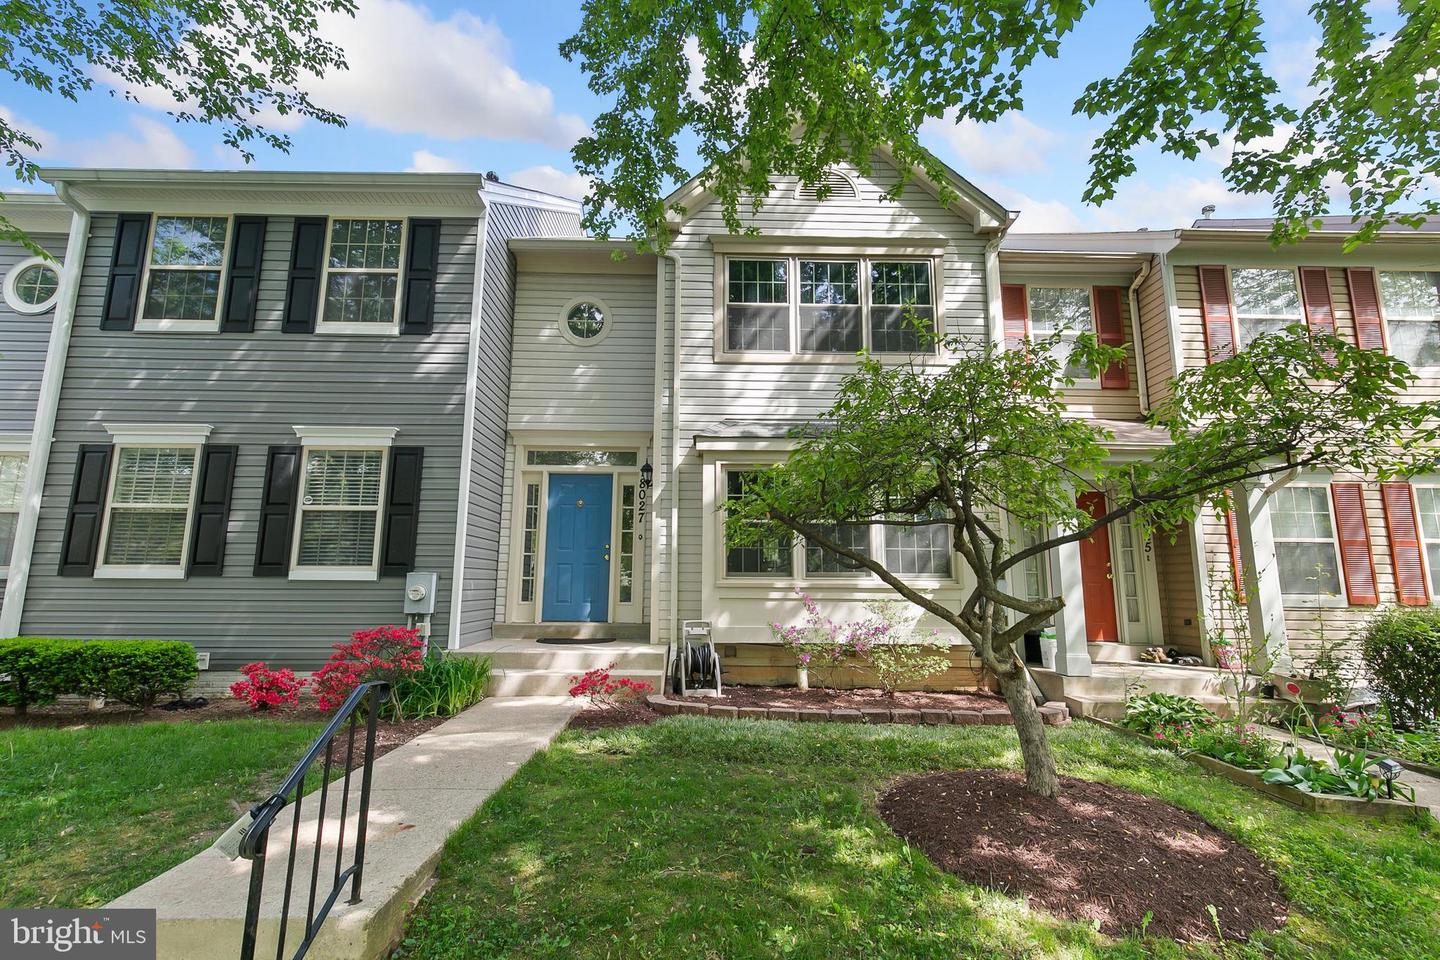 View Gaithersburg, MD 20877 townhome